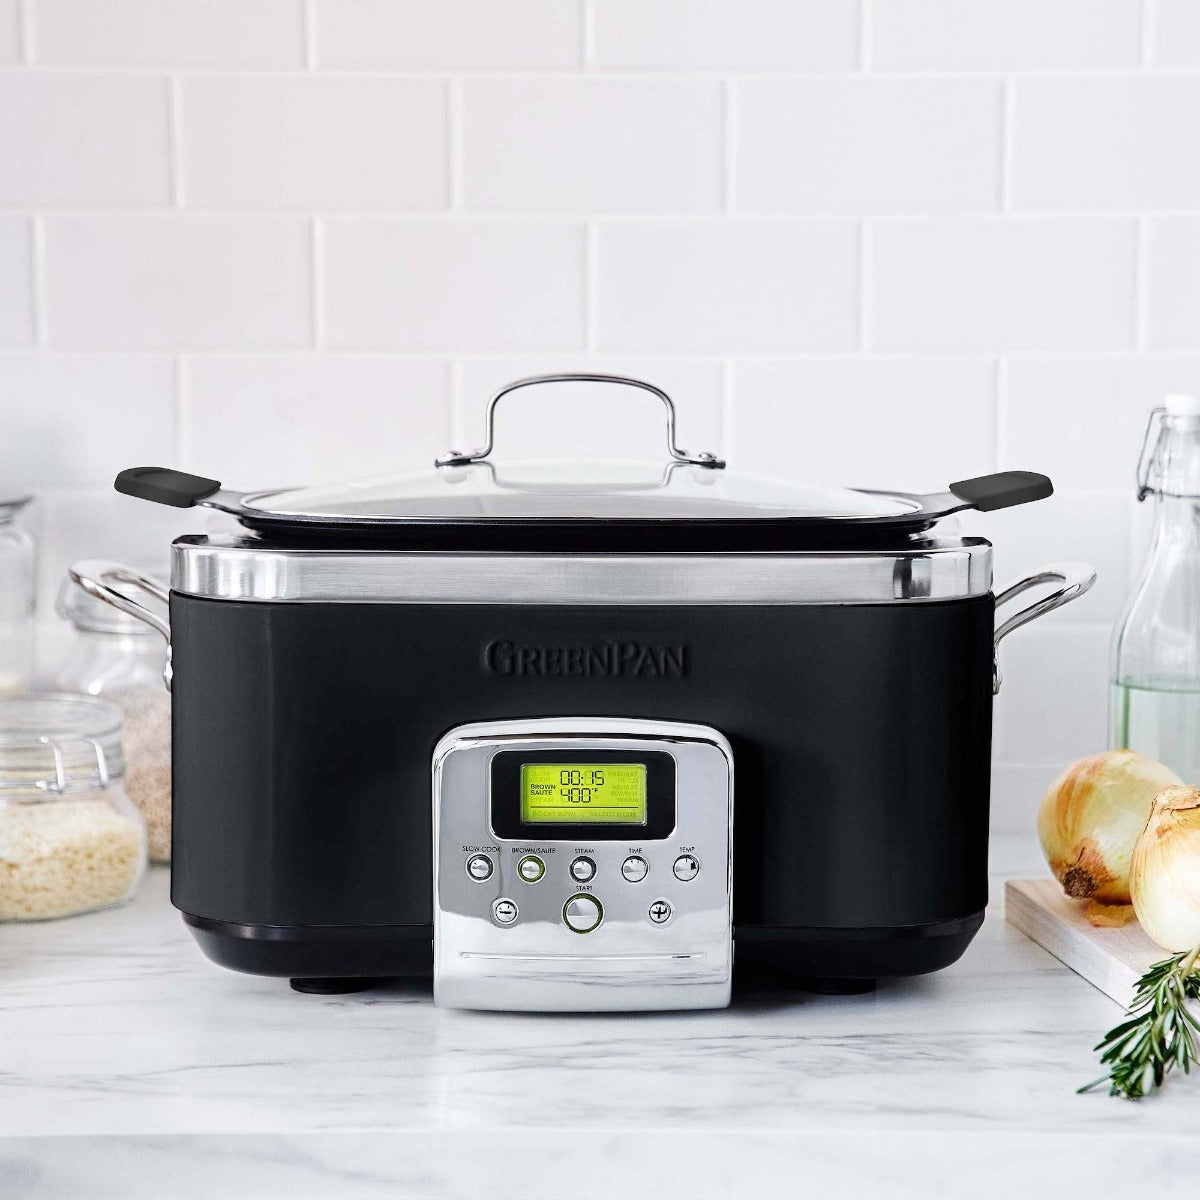 Cook & Carry 6 qt Stainless/Black Slow Cooker by Crock-Pot at